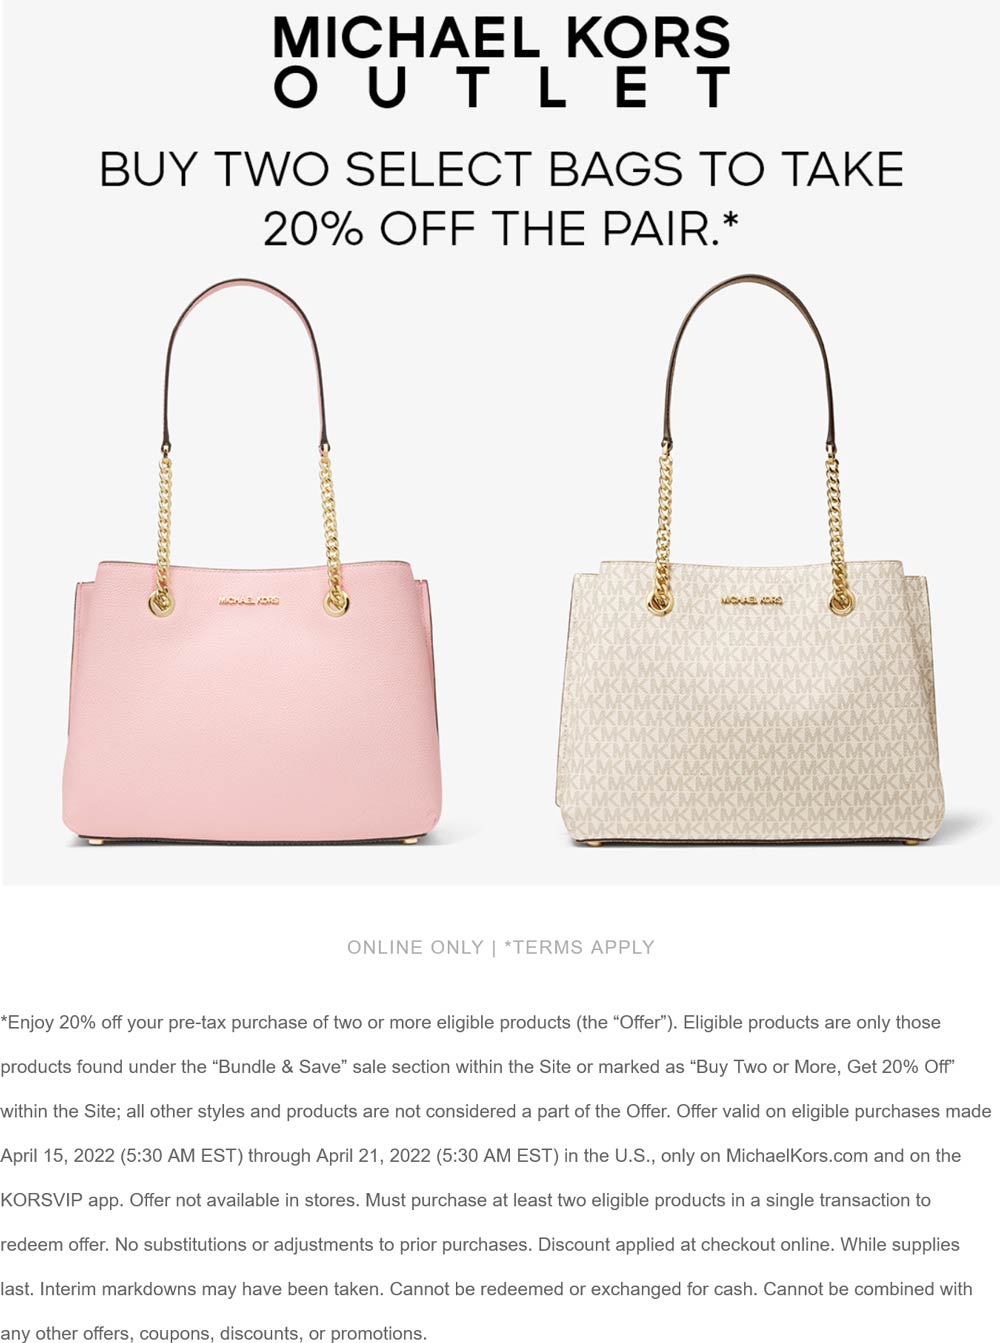 Michael Kors Outlet stores Coupon  20% off 2+ bags online at Michael Kors Outlet #michaelkorsoutlet 